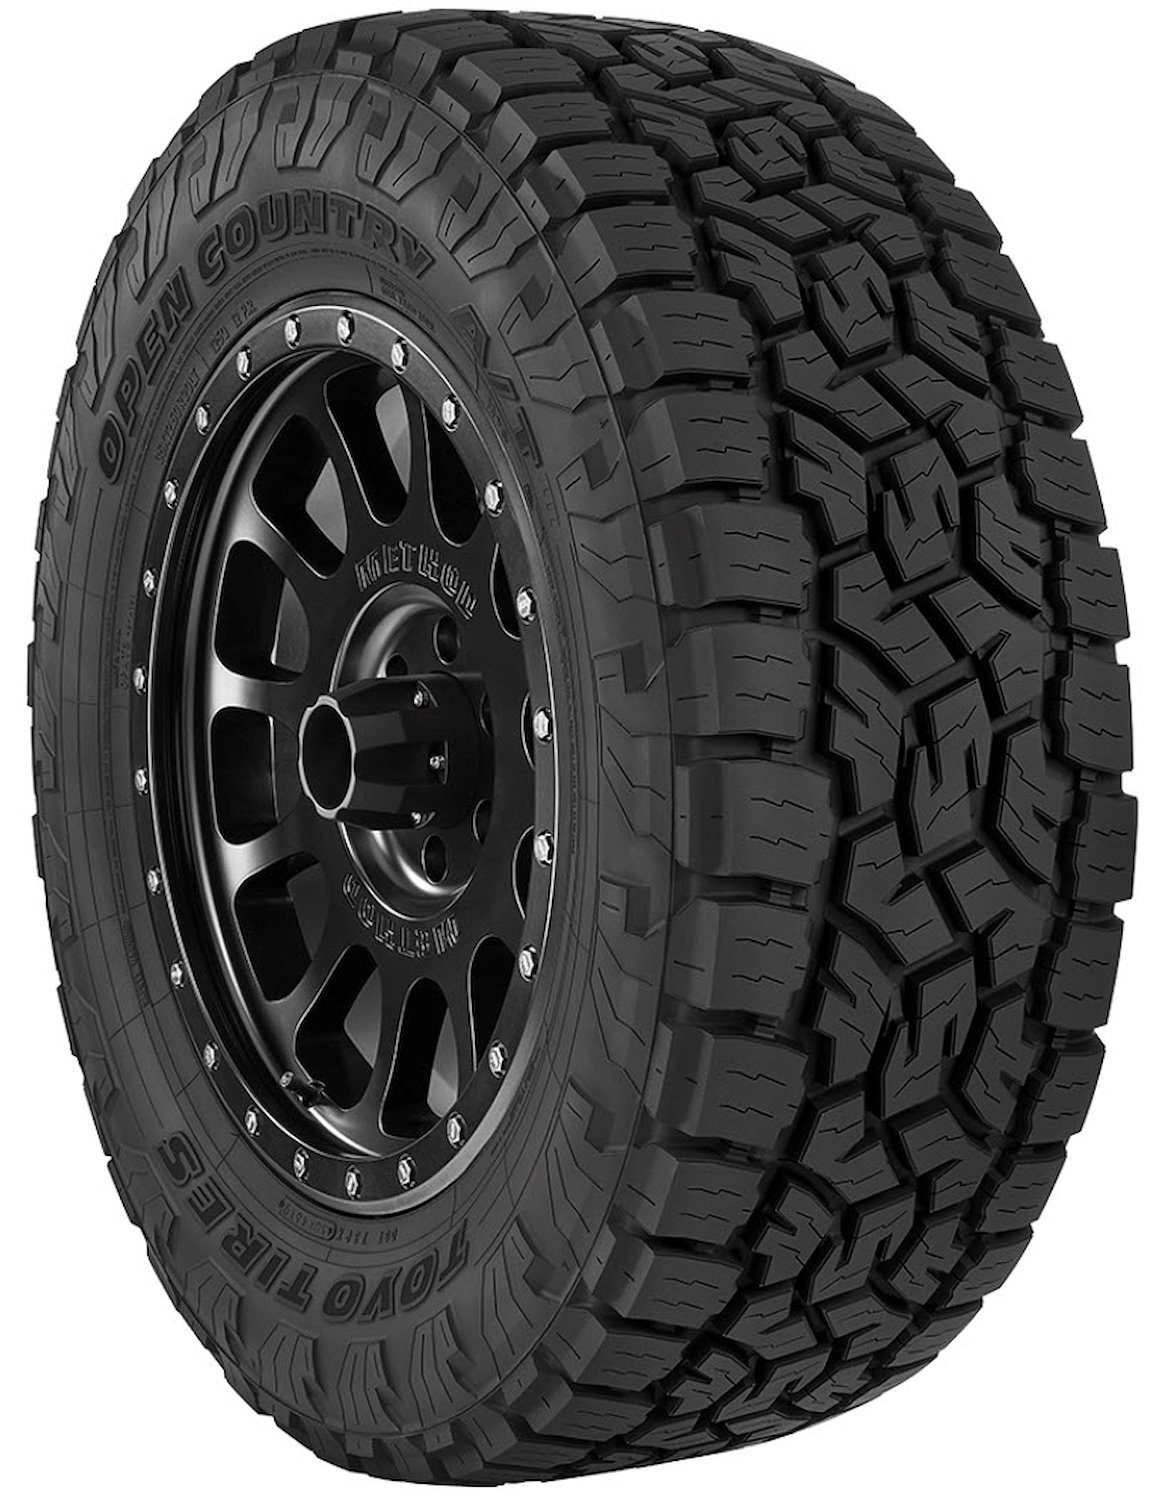 Open Country A/T III Light Truck Radial Tire LT225/75R16